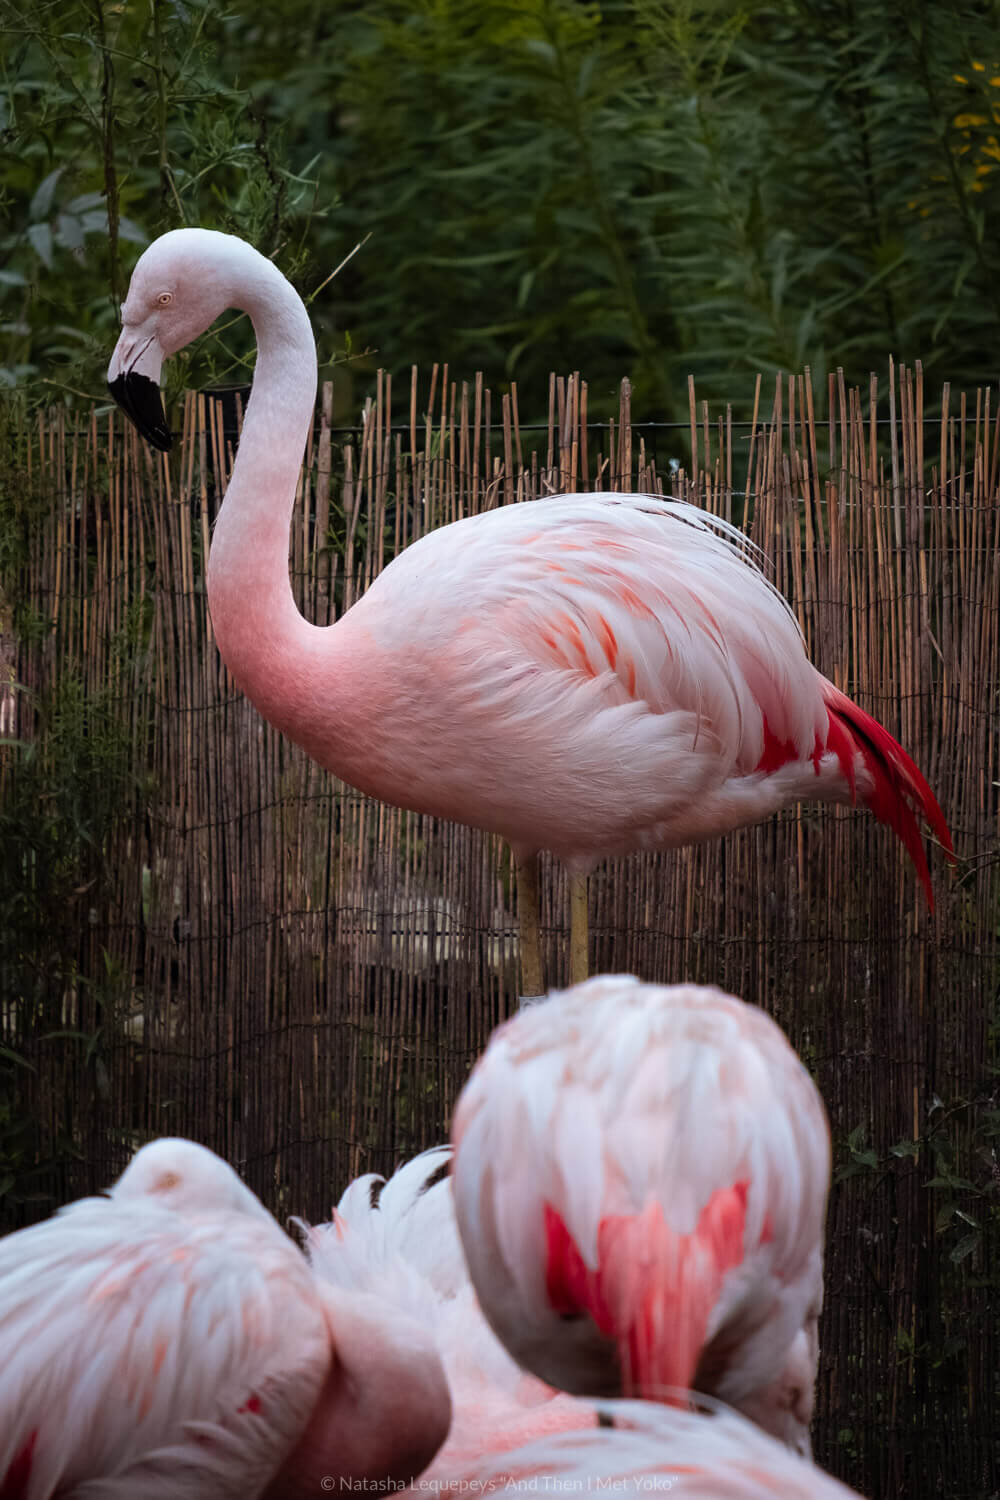 Flamingoes at the Lincoln Park Zoo, Chicago, USA. Travel photography and guide by © Natasha Lequepeys for "And Then I Met Yoko". #chicago #usa #travelblog #travelphotography